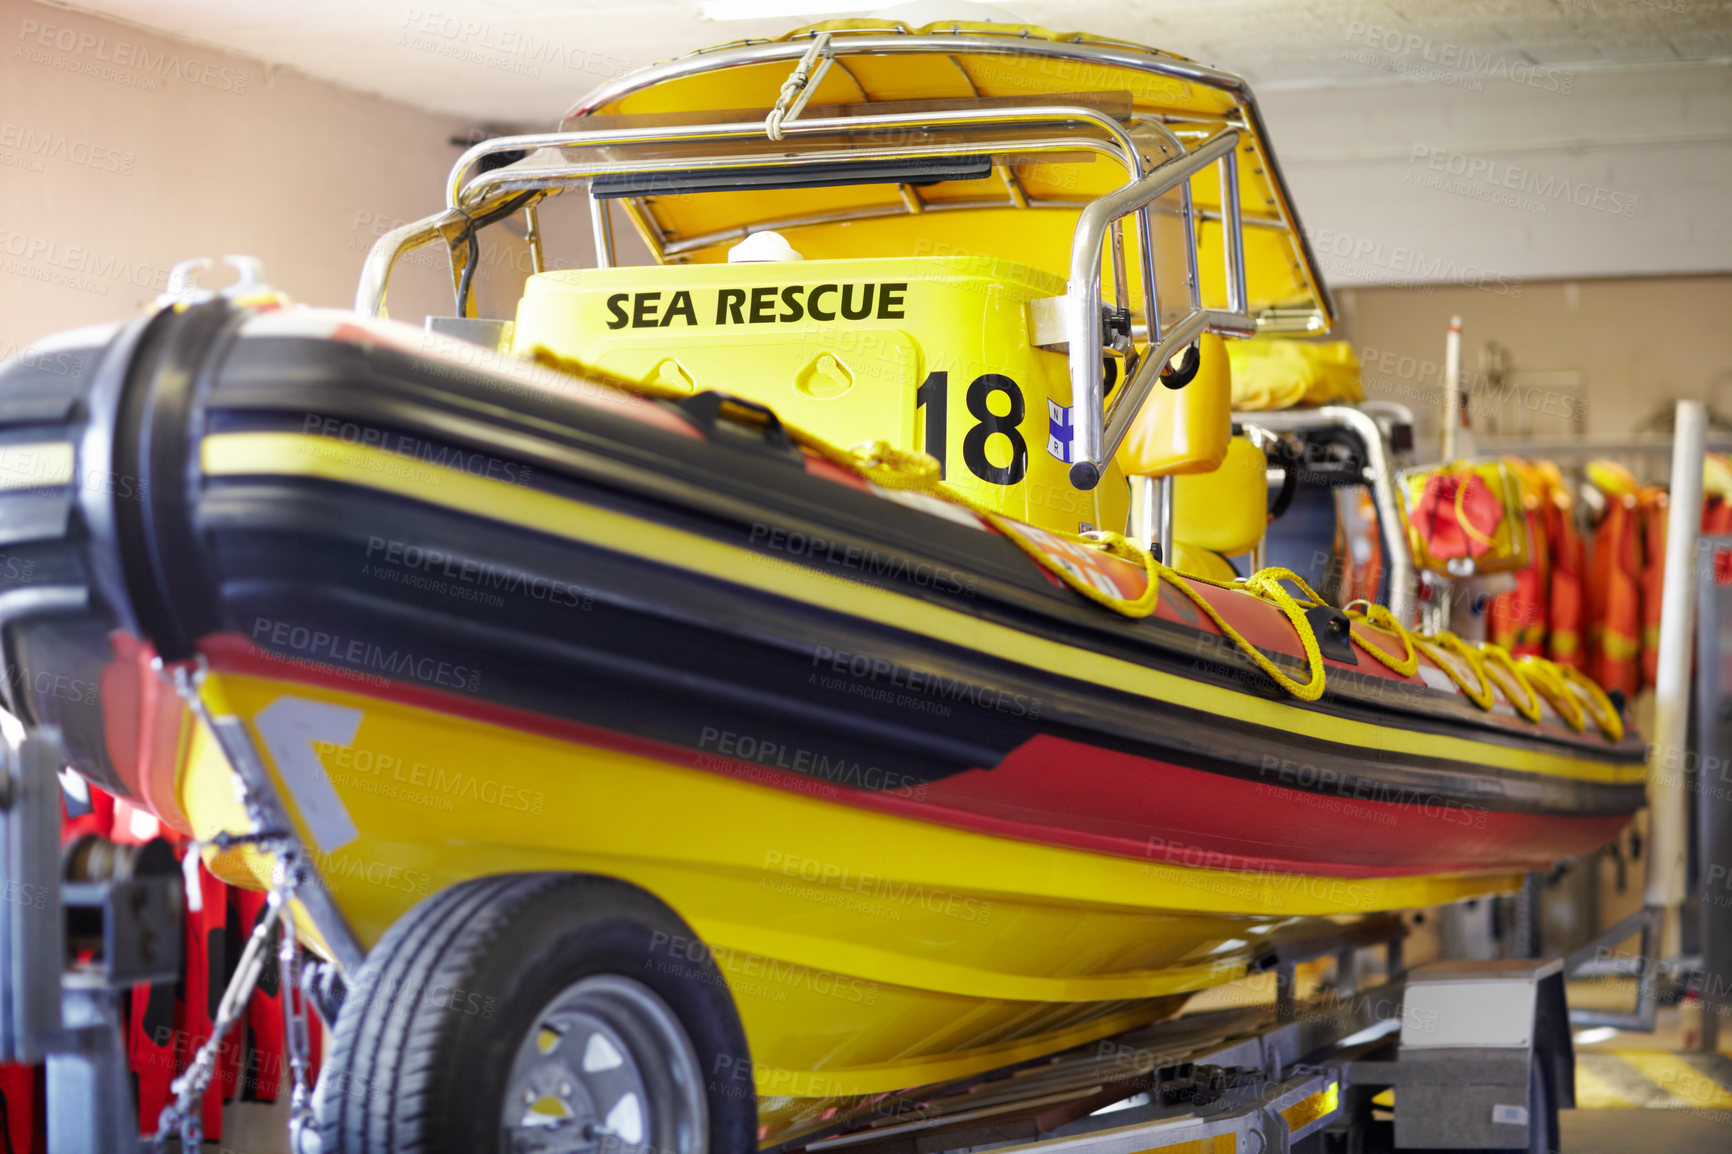 Buy stock photo Closeup of a sea rescue boat inside a lifeguard station. A yellow stationery coast guard emergency vessel on a trailer in a garage ready to be used for ocean patrolling security and transportation